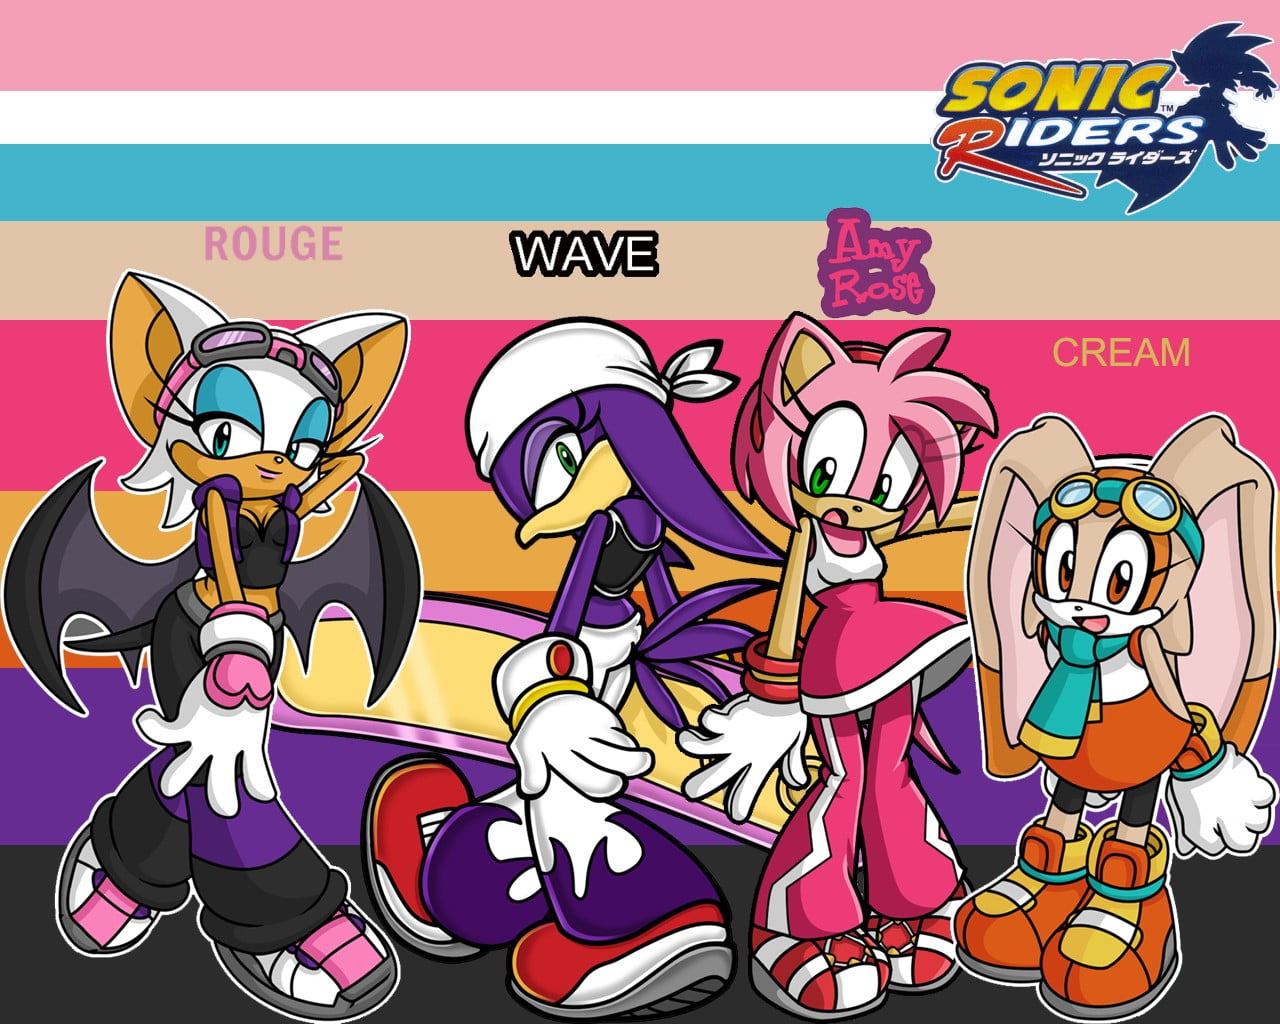 Sonic Riders graphic, Sonic the Hedgehog, Rouge the Bat, people